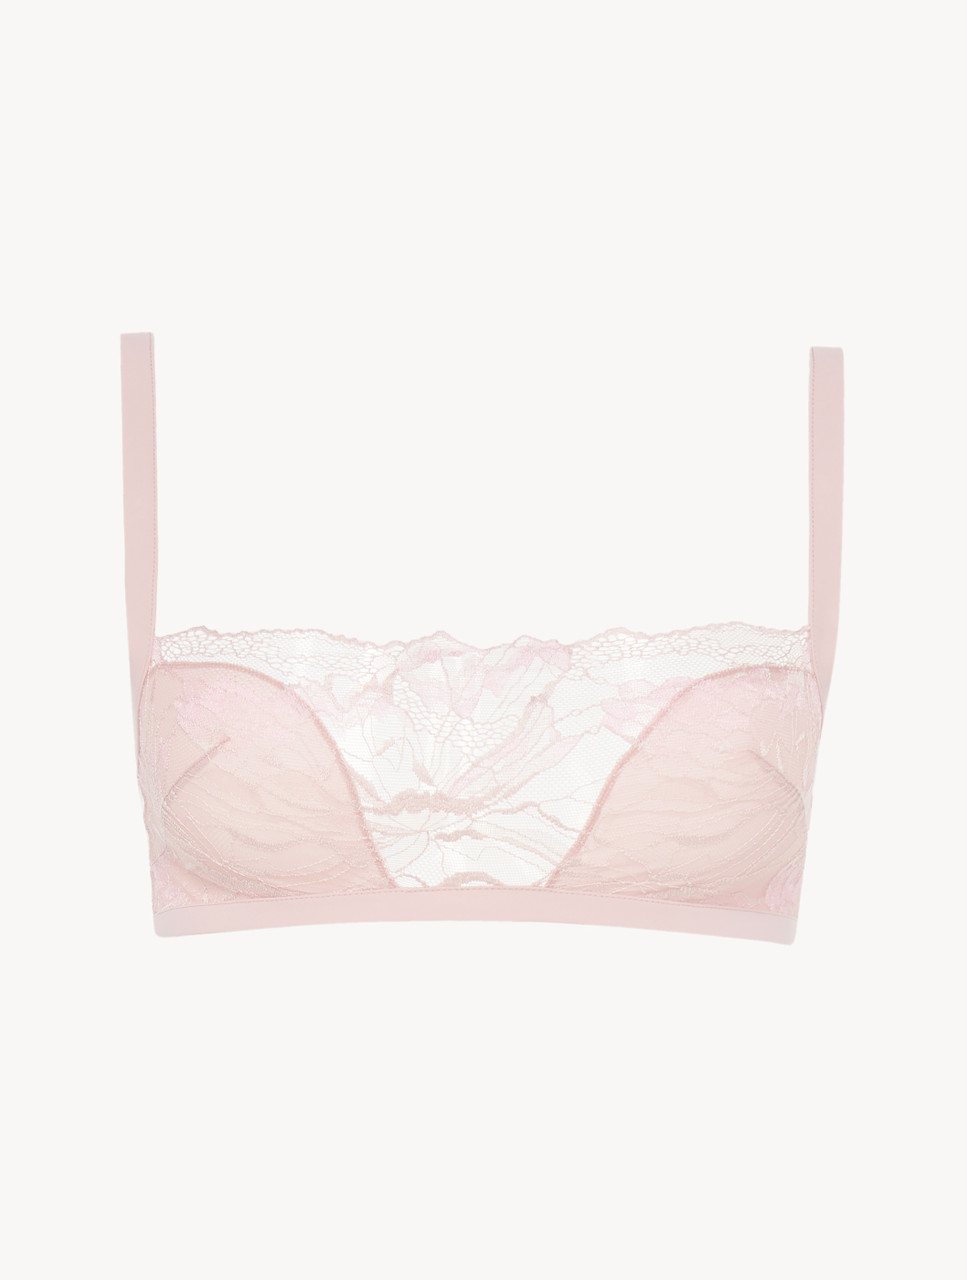 Bralette in pink Lycra with French Leavers lace